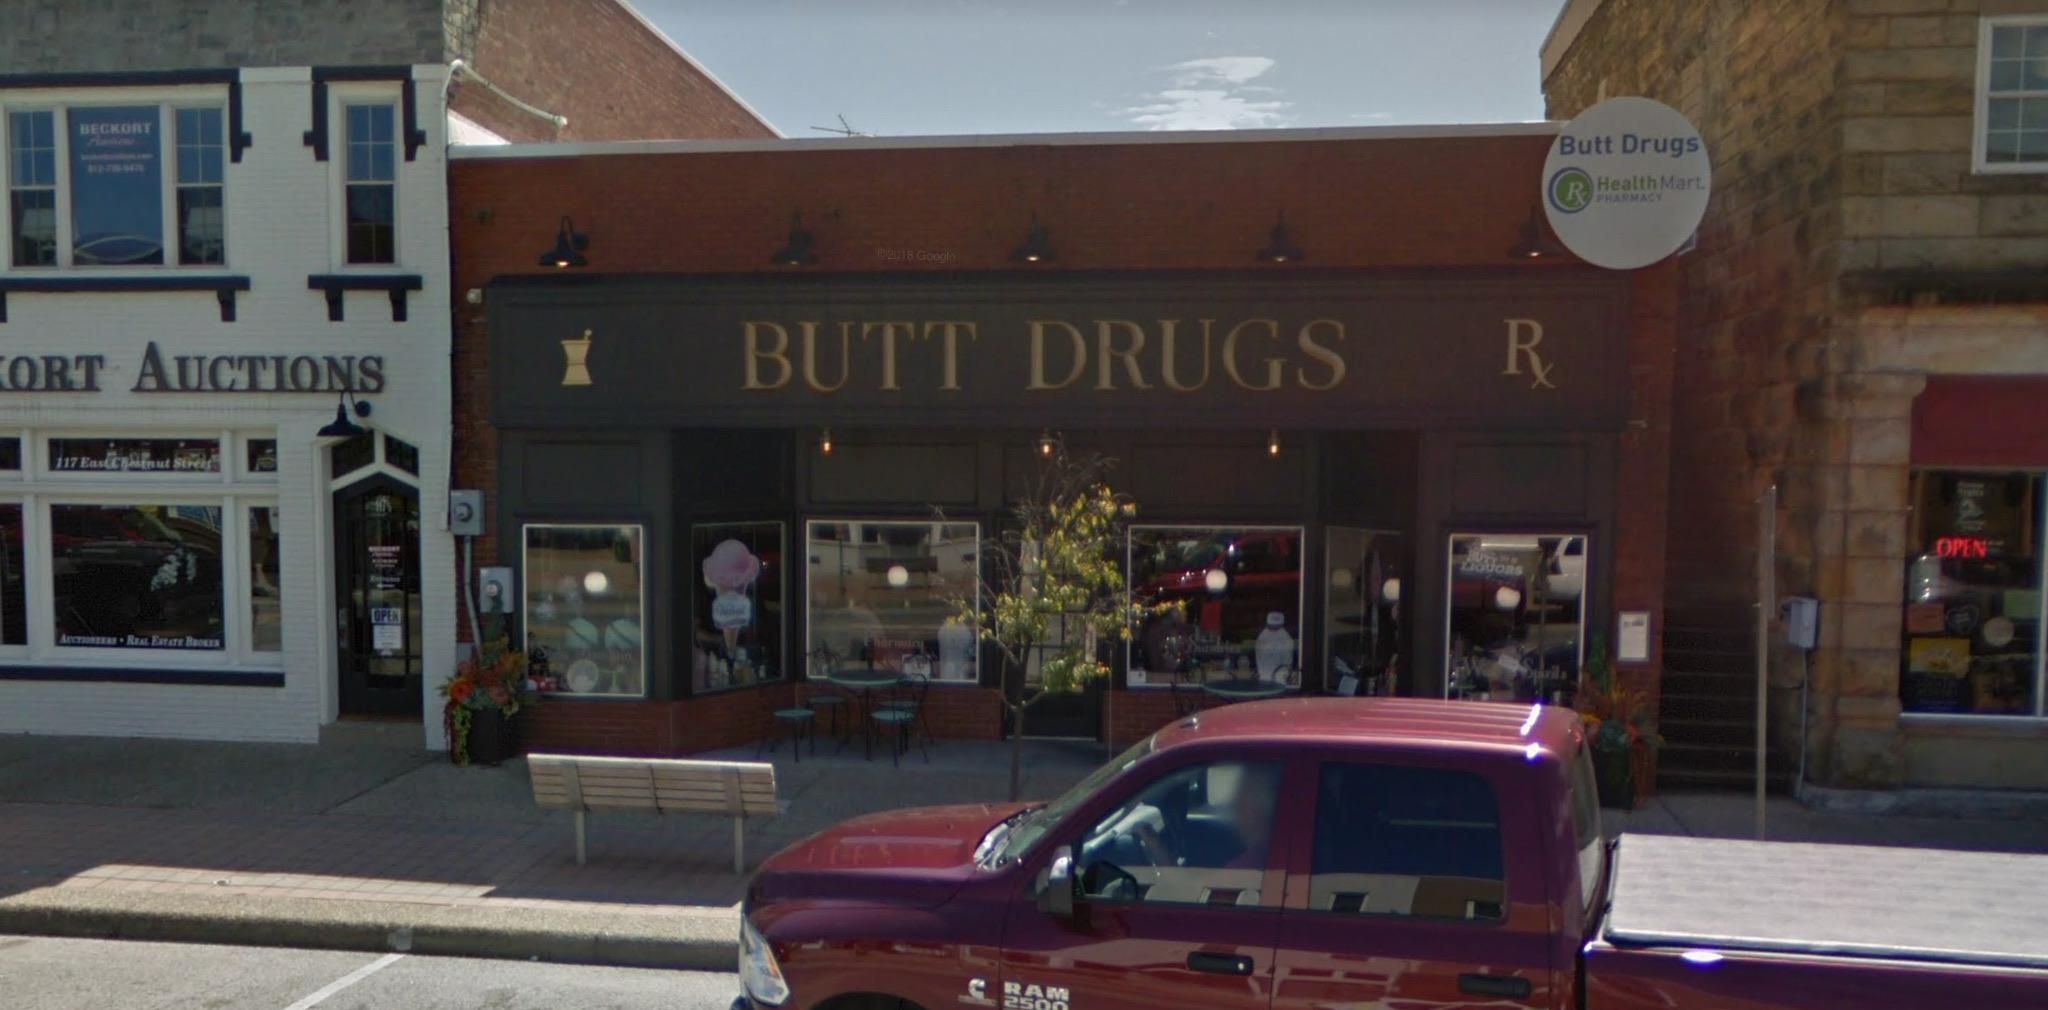 Every time I drive through Corydon, Indiana I always forget to take a picture. But here it is in all its glory. I give you, Butt Drugs!